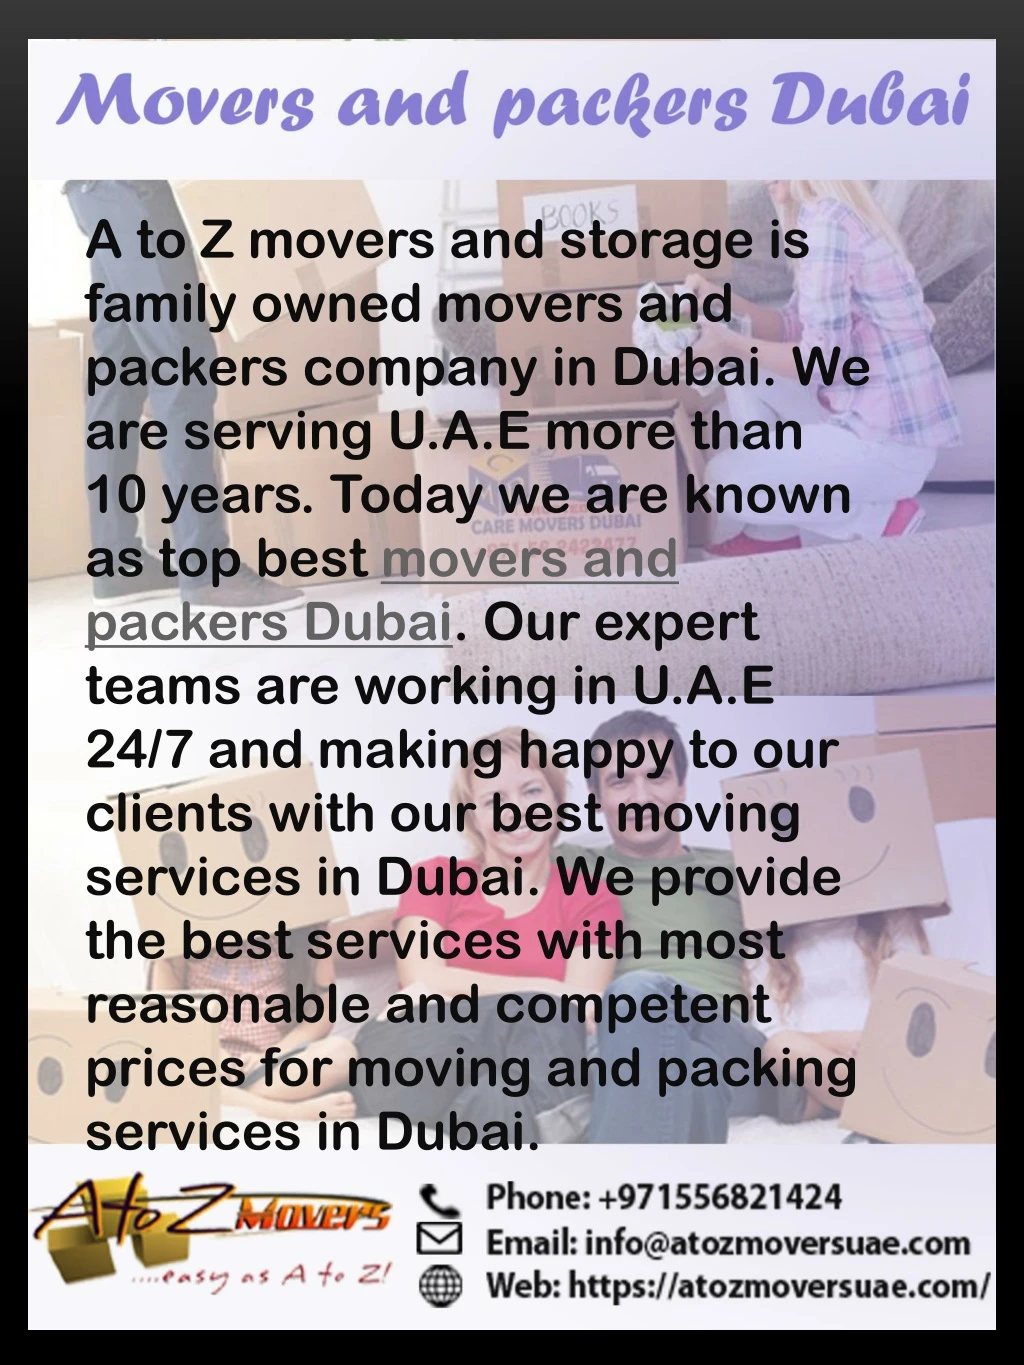 a to z movers and storage is family owned movers